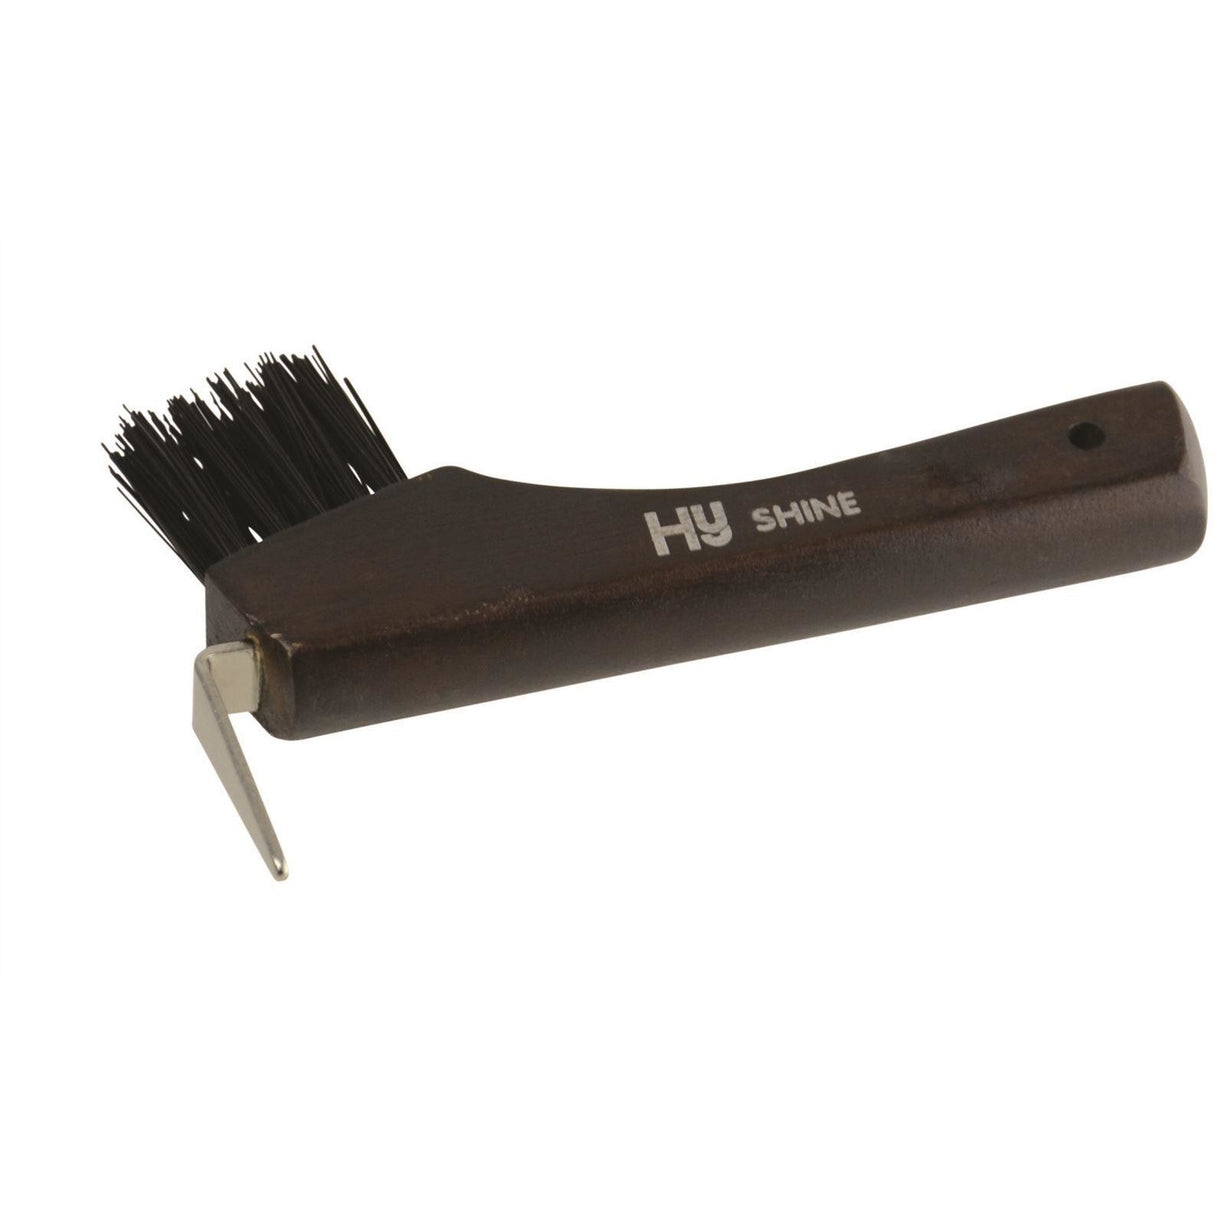 Cure-pied HySHINE Deluxe avec brosse